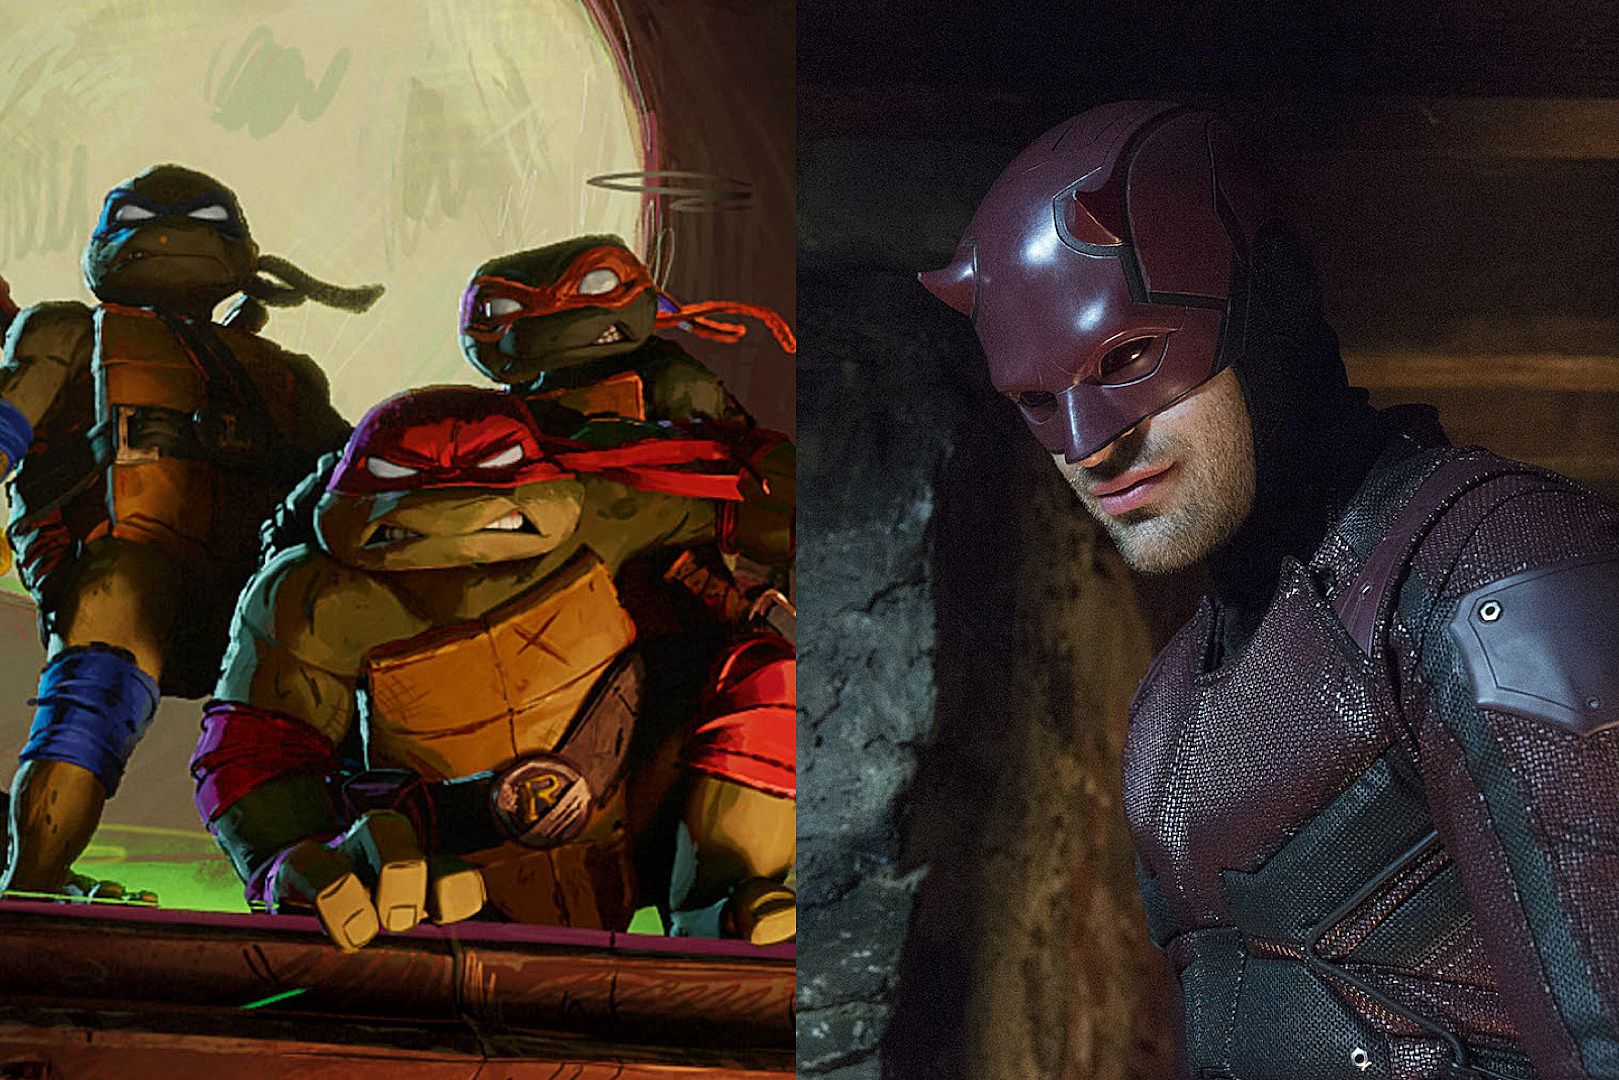 https://townsquare.media/site/442/files/2023/07/attachment-ninja-turtles-marvel-connection.jpg